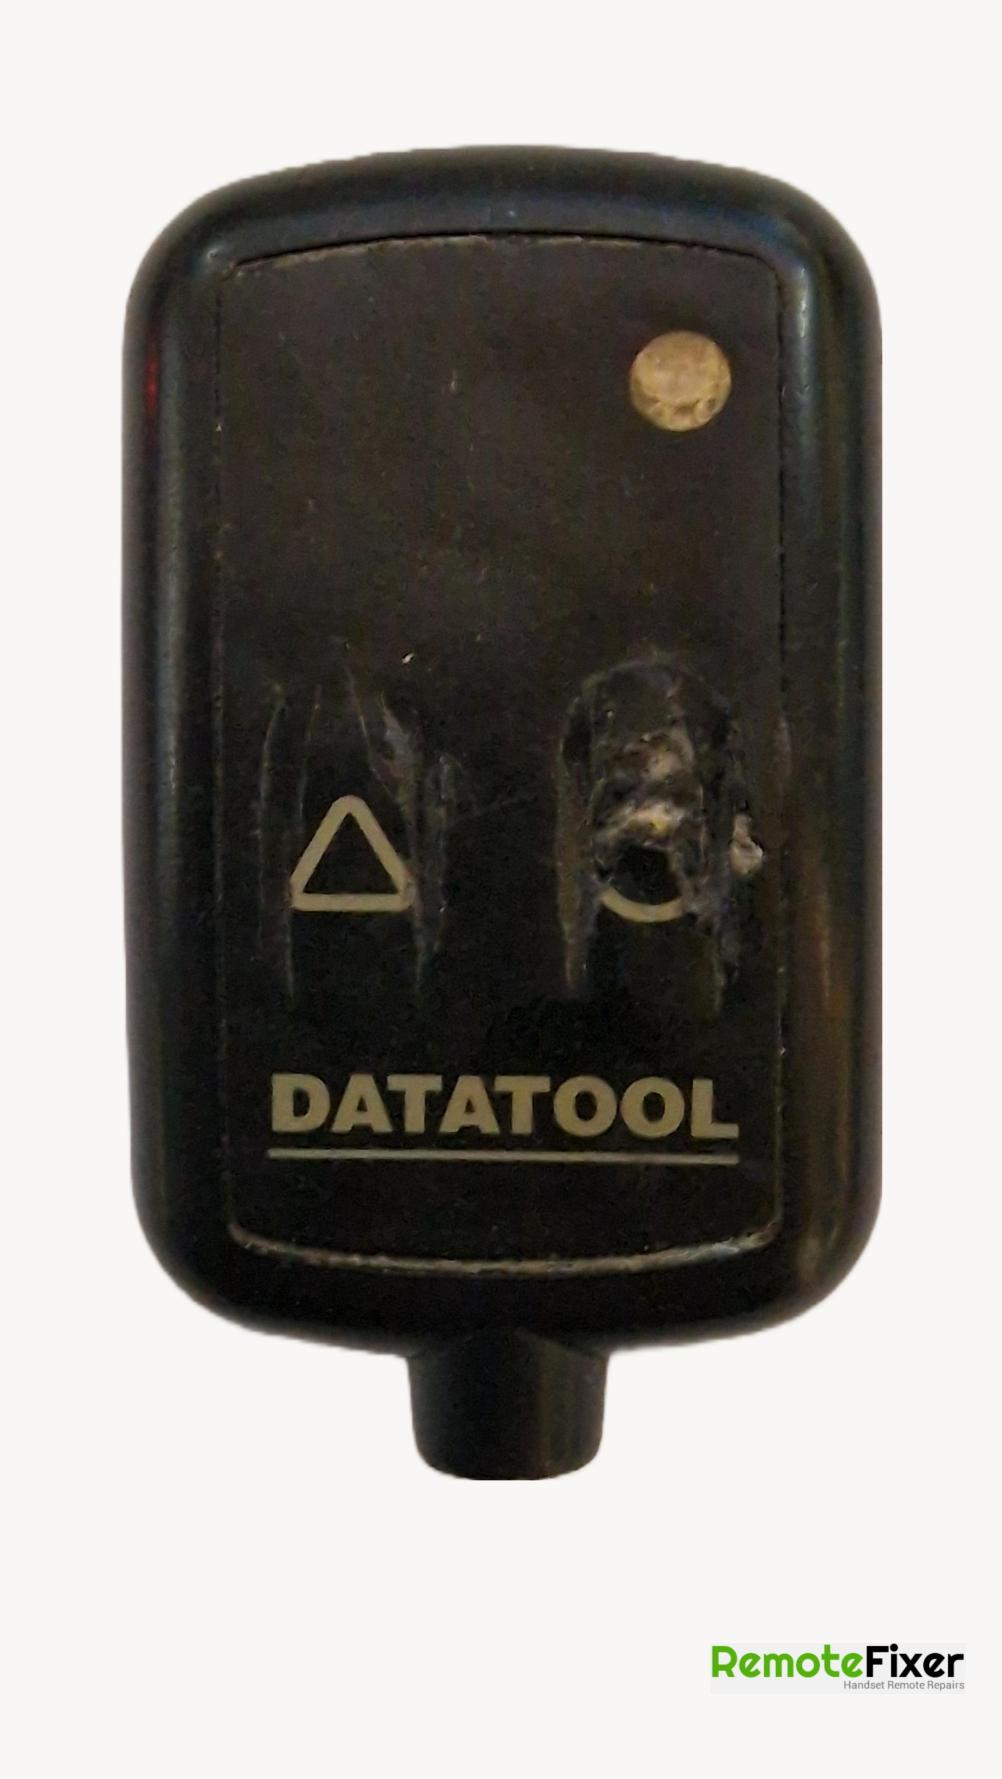 DATATOOL MOTORCYCLE ALARM Remote Control - Front Image